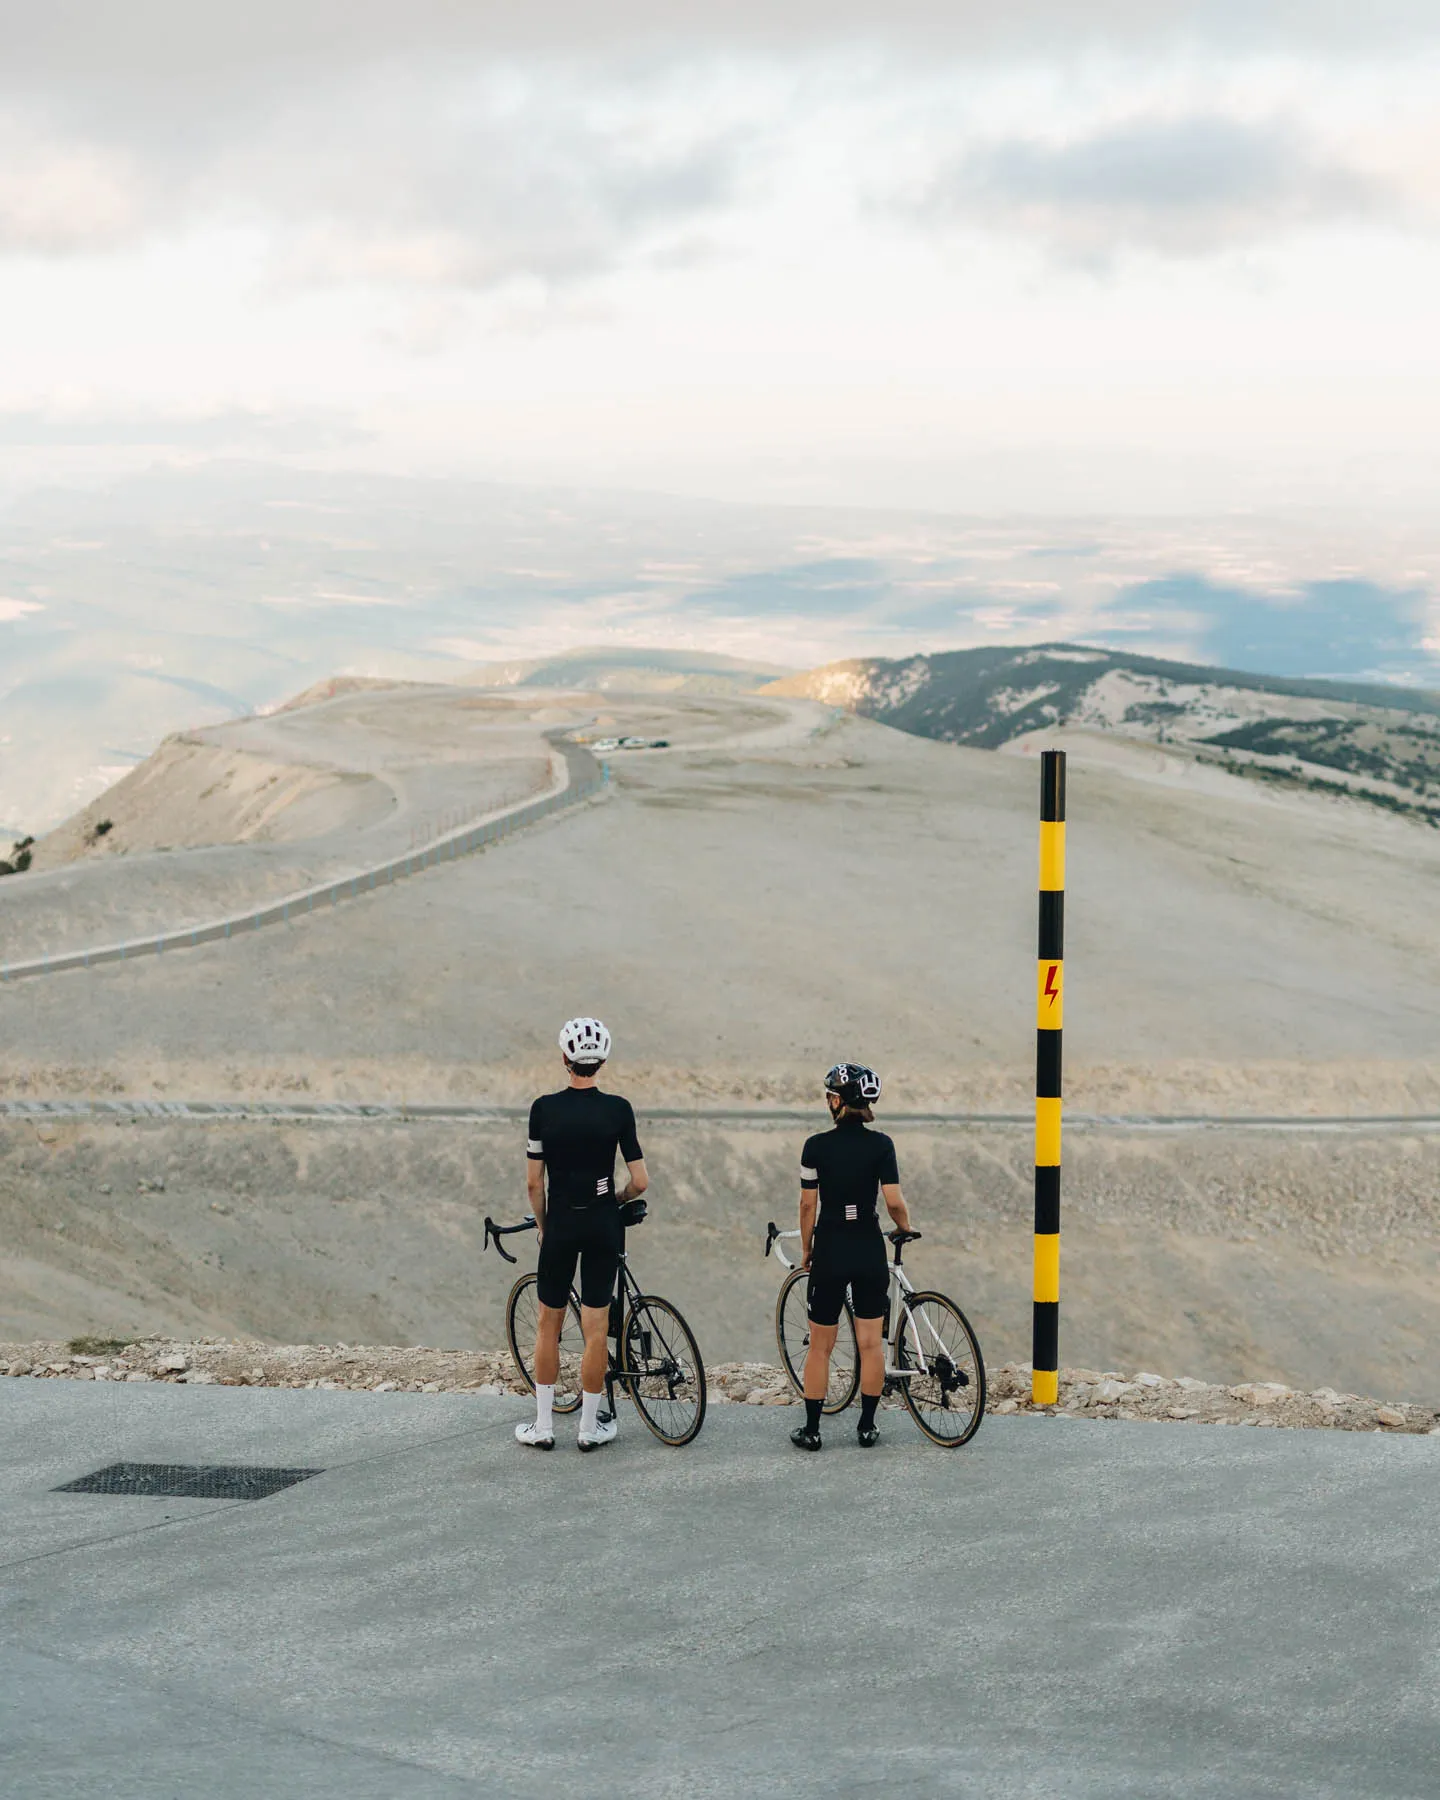 Mount Ventoux Climb - The View From Peak